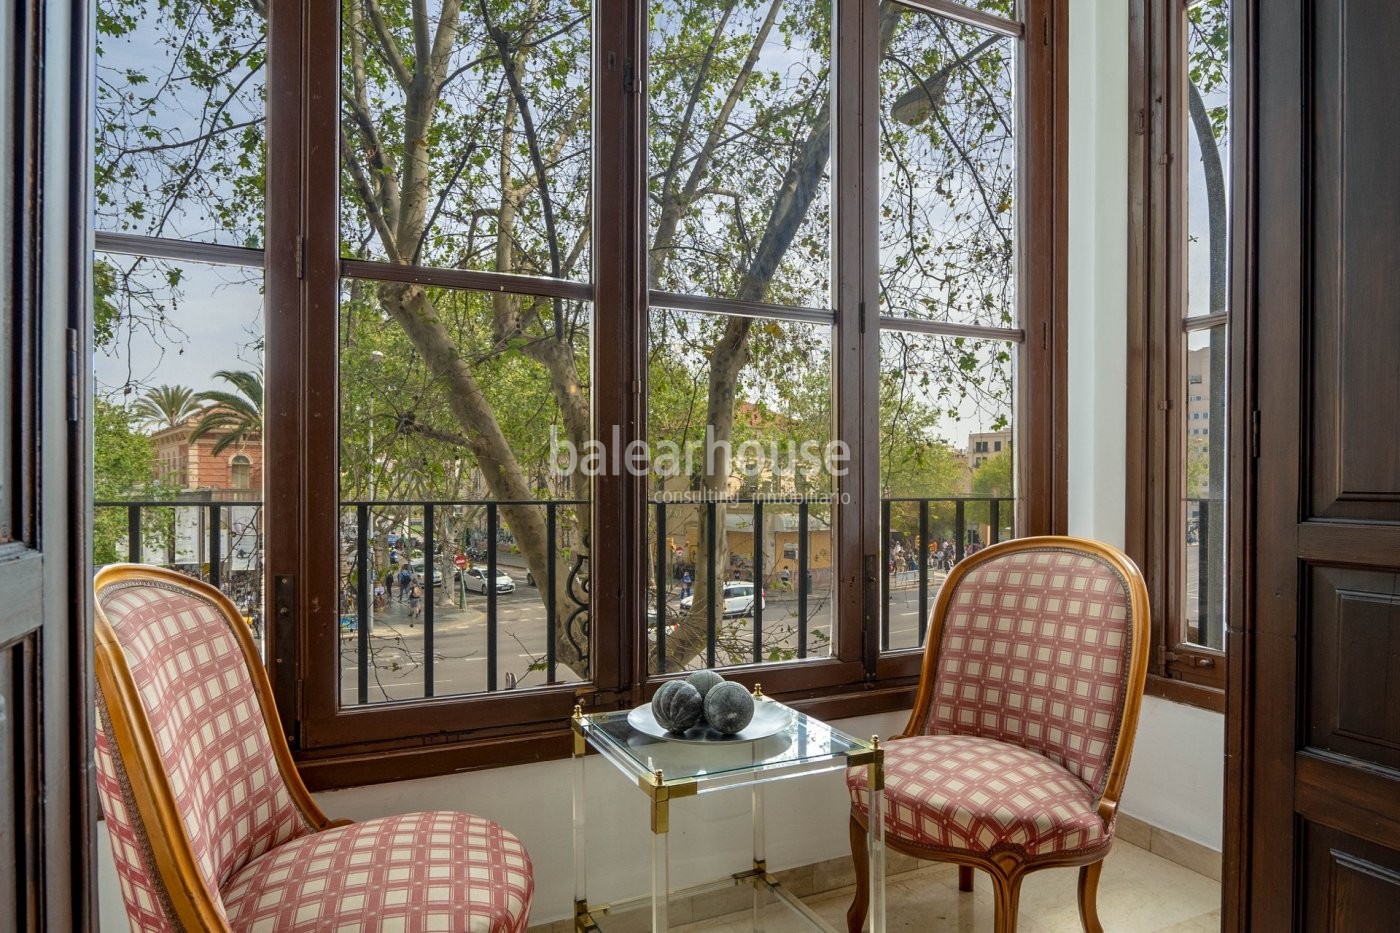 Large stately flat with lots of natural light in an excellent location in the centre of Palma